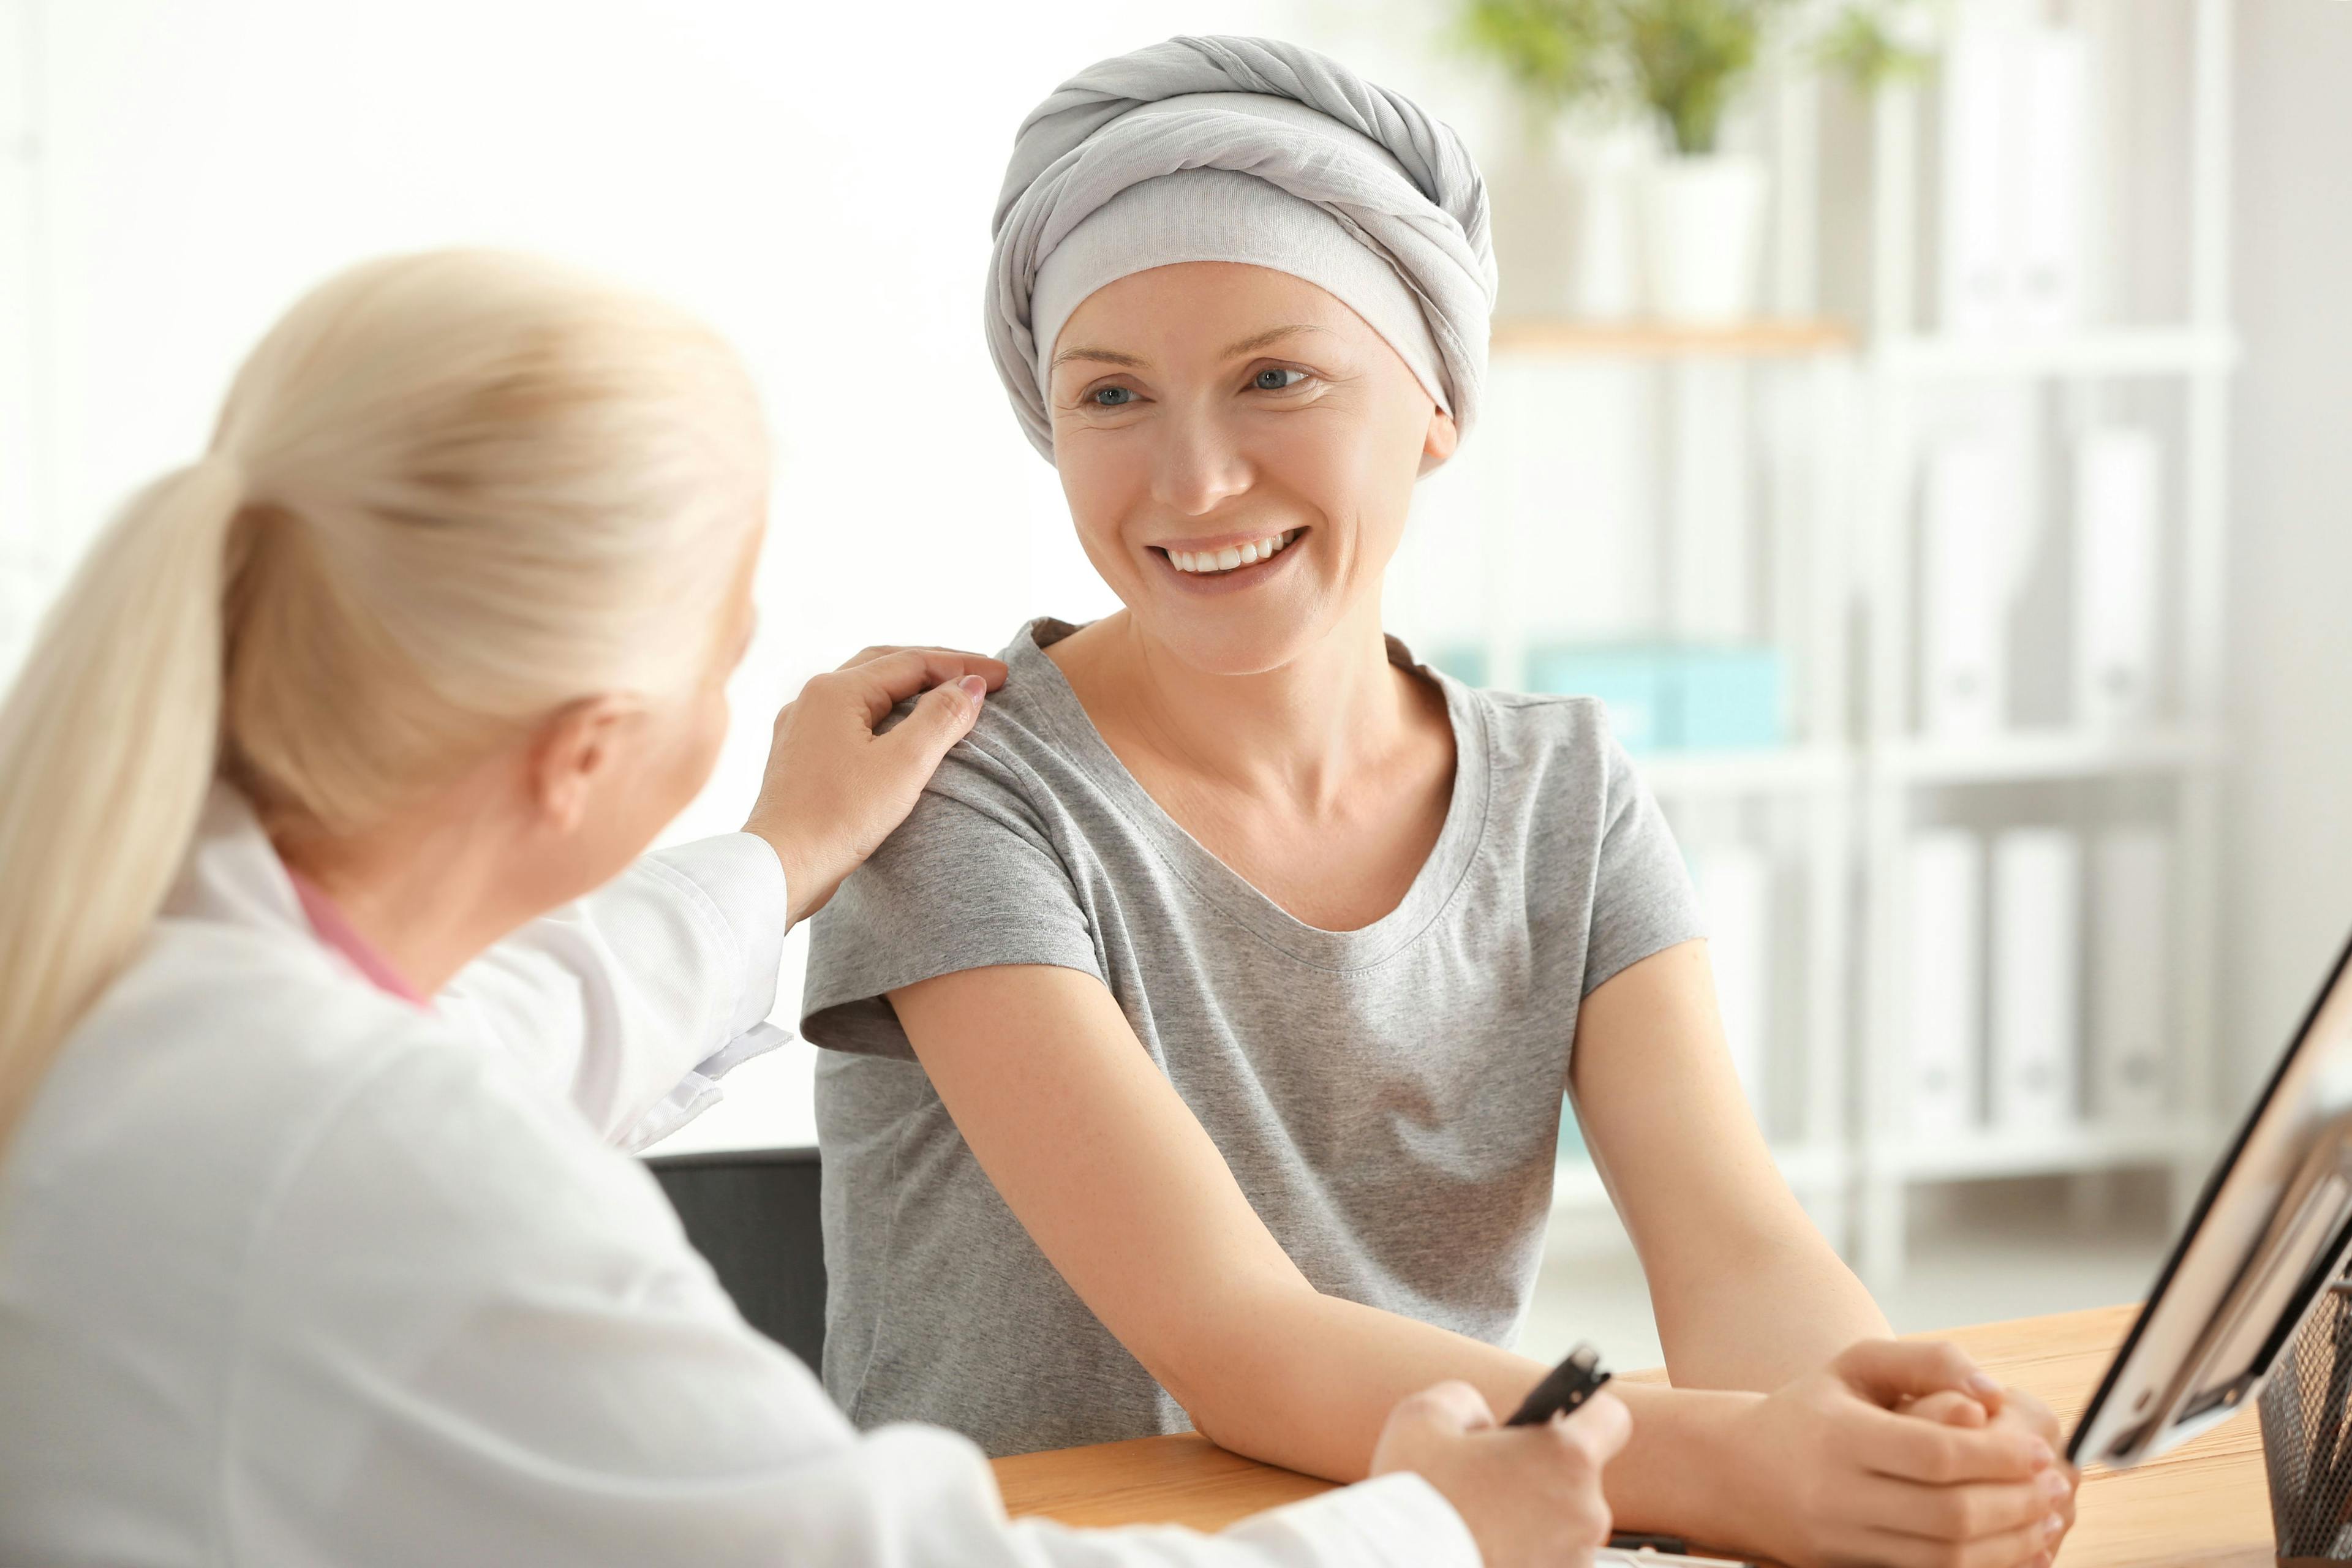 Woman after chemotherapy visiting doctor in hospital | Image Credit: Pixel-Shot - stock.adobe.com